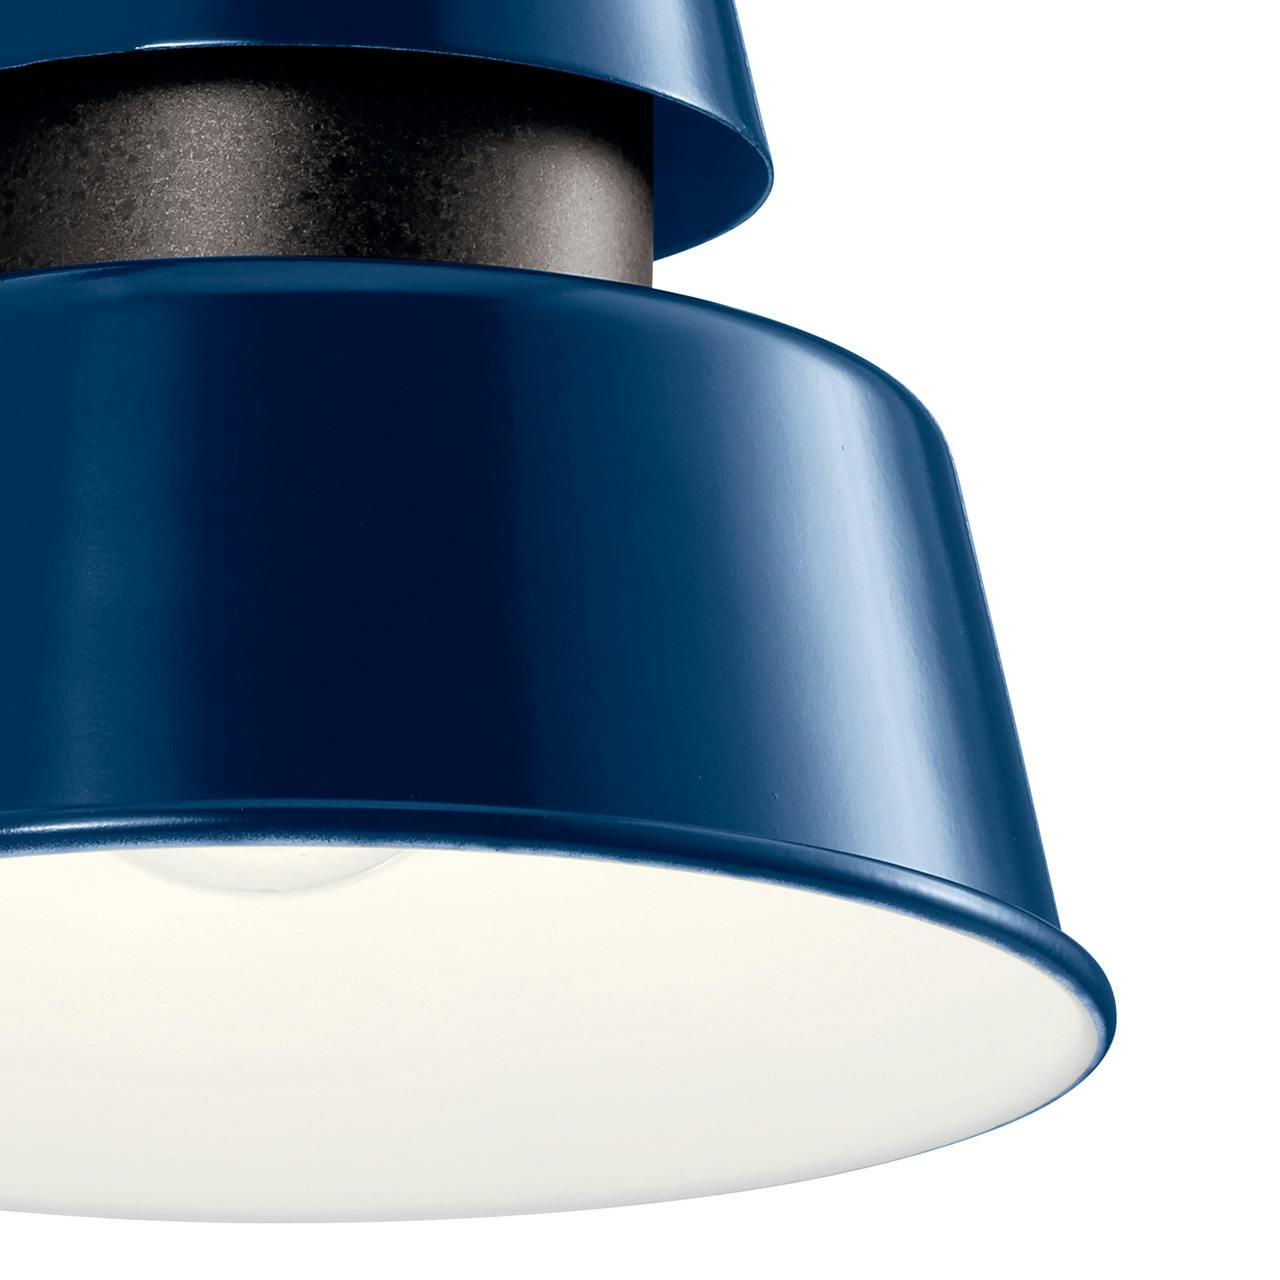 Close up view of the Lozano 9.75" Wall Light Catalina Blue on a white background